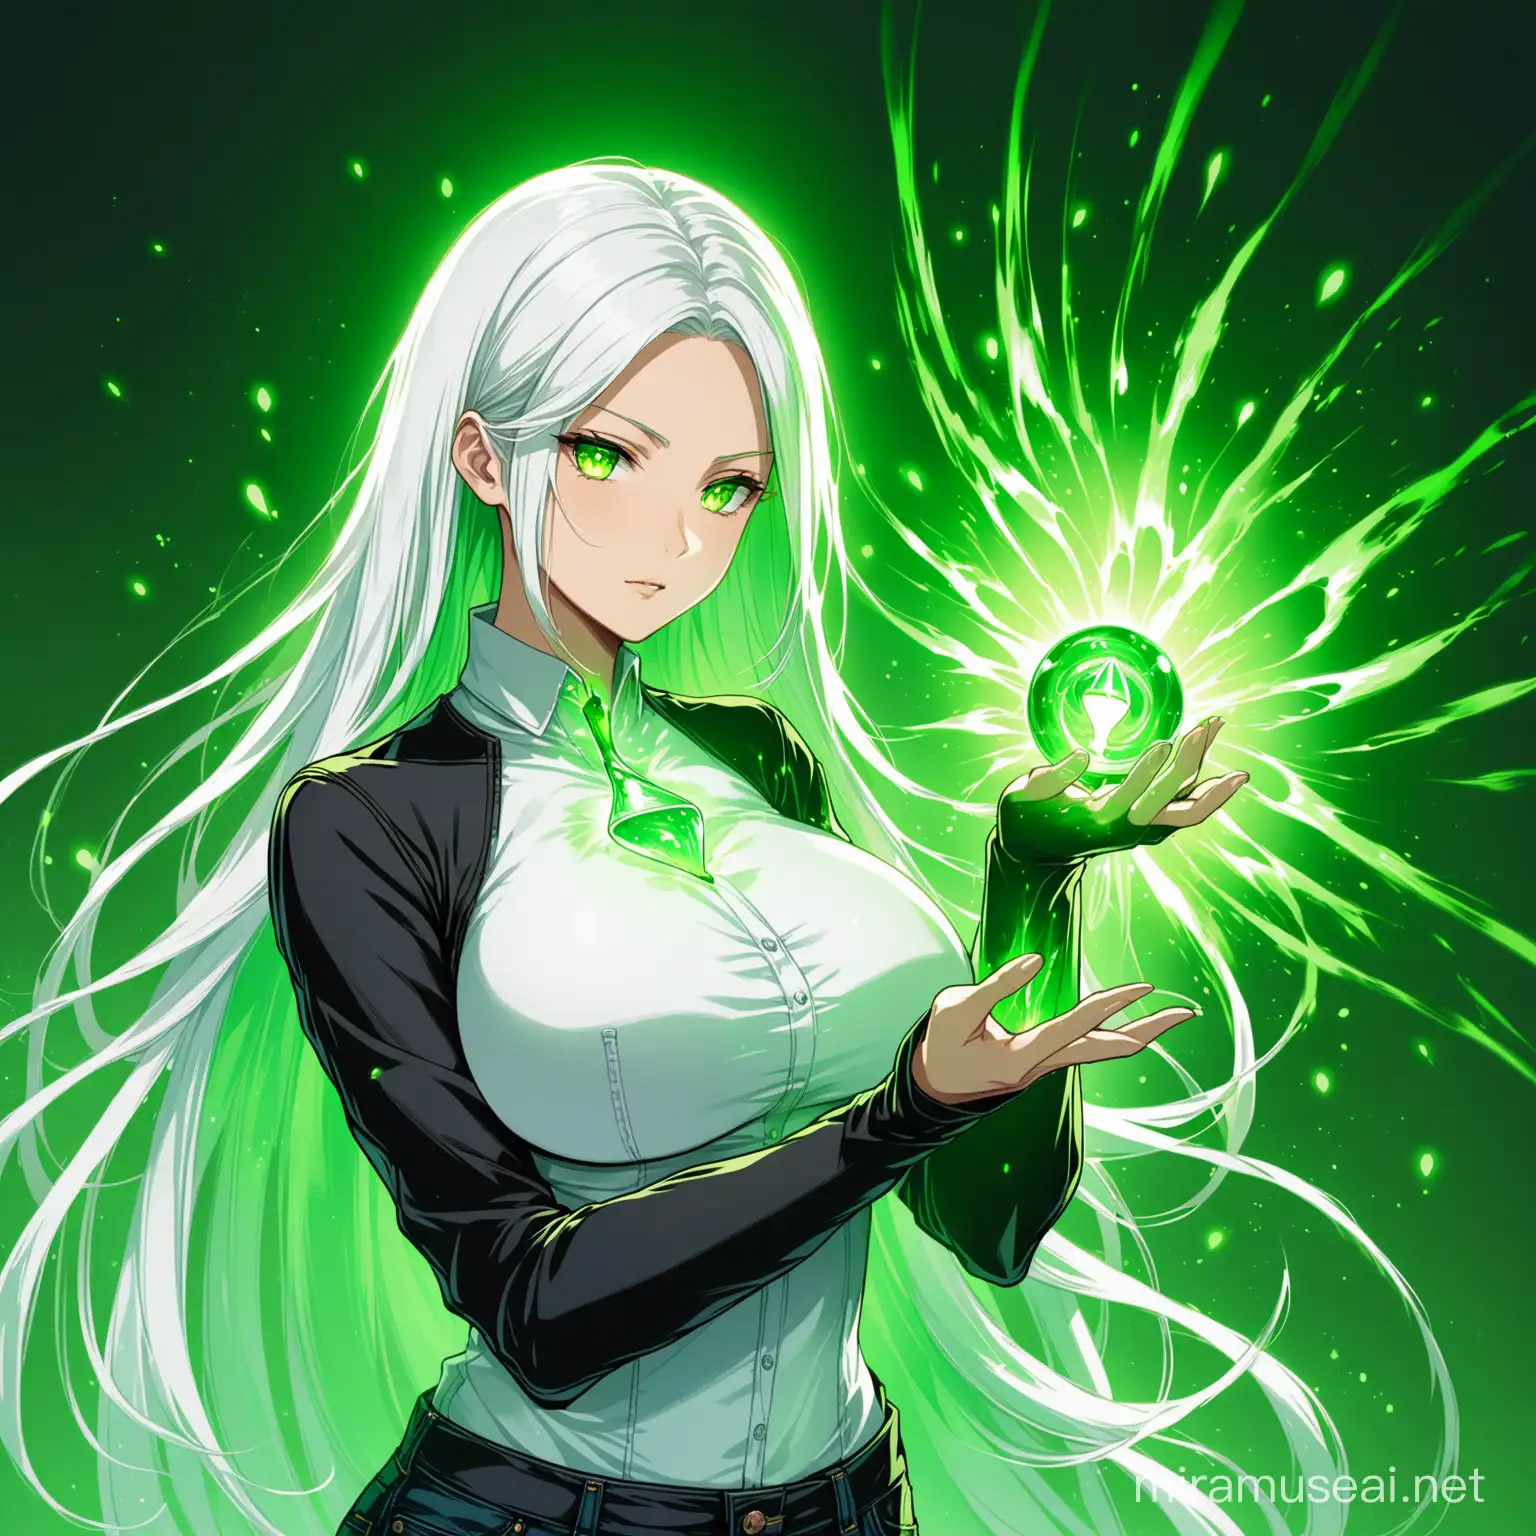 Enchanting Female Character with Black and Green Energy and White Hair